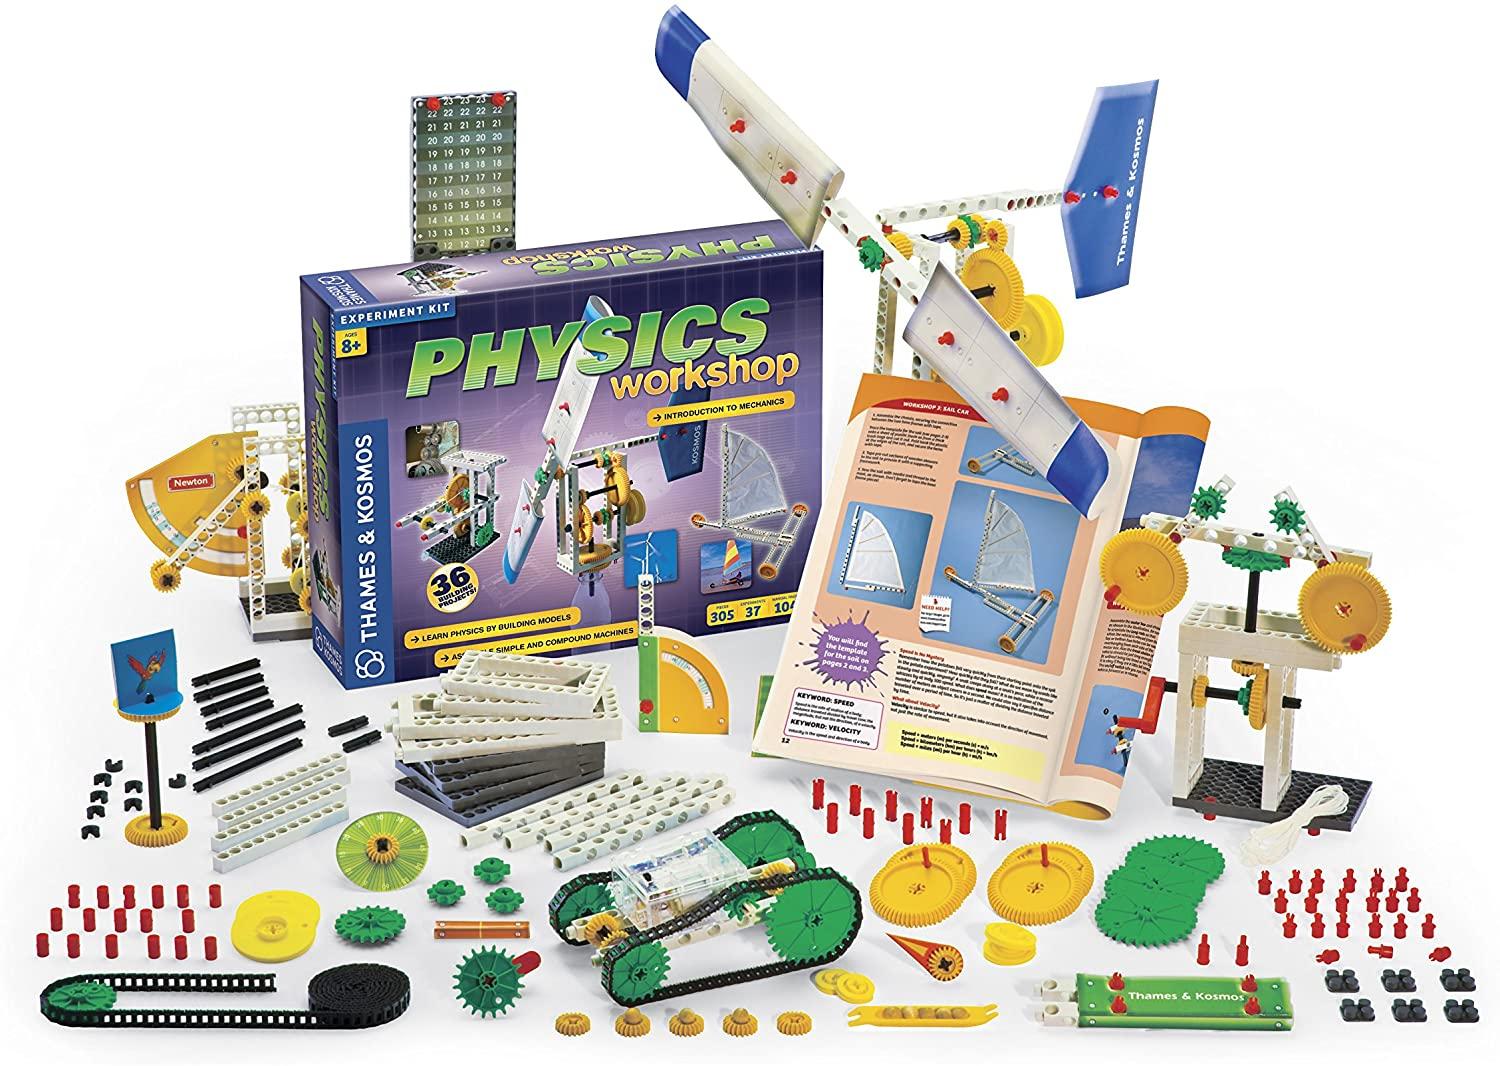 305 Piece Thames and Kosmos Physics Workshop Experiment Kit for $18.44